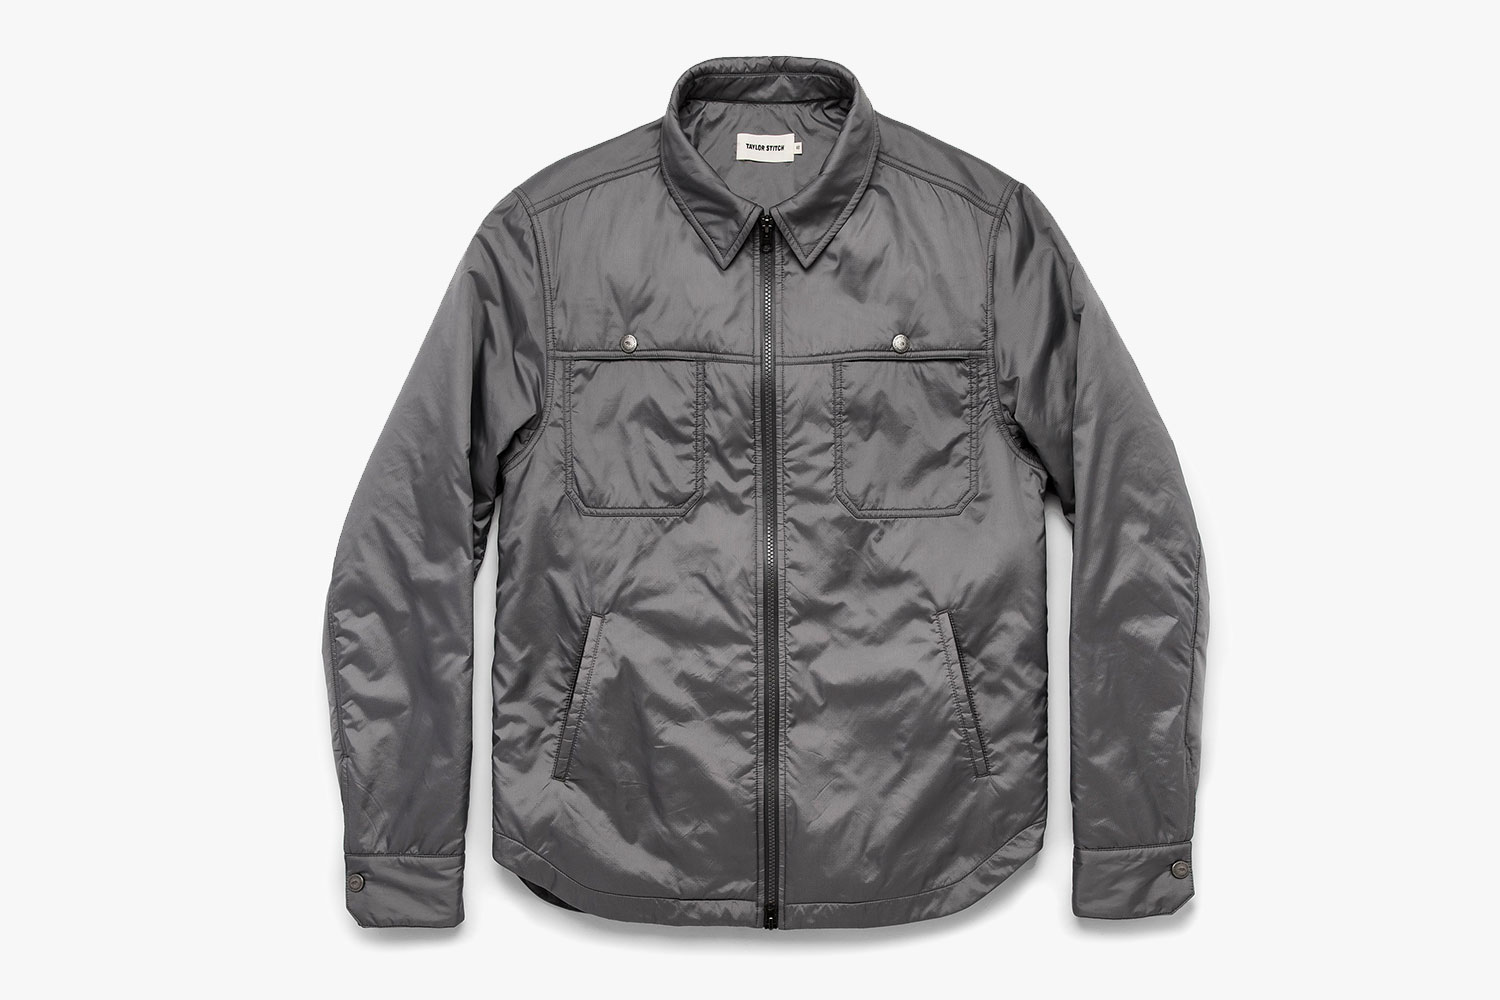 The Taylor Stitch Bushland Jacket Shirt Seamlessly Masters Indoor and ...